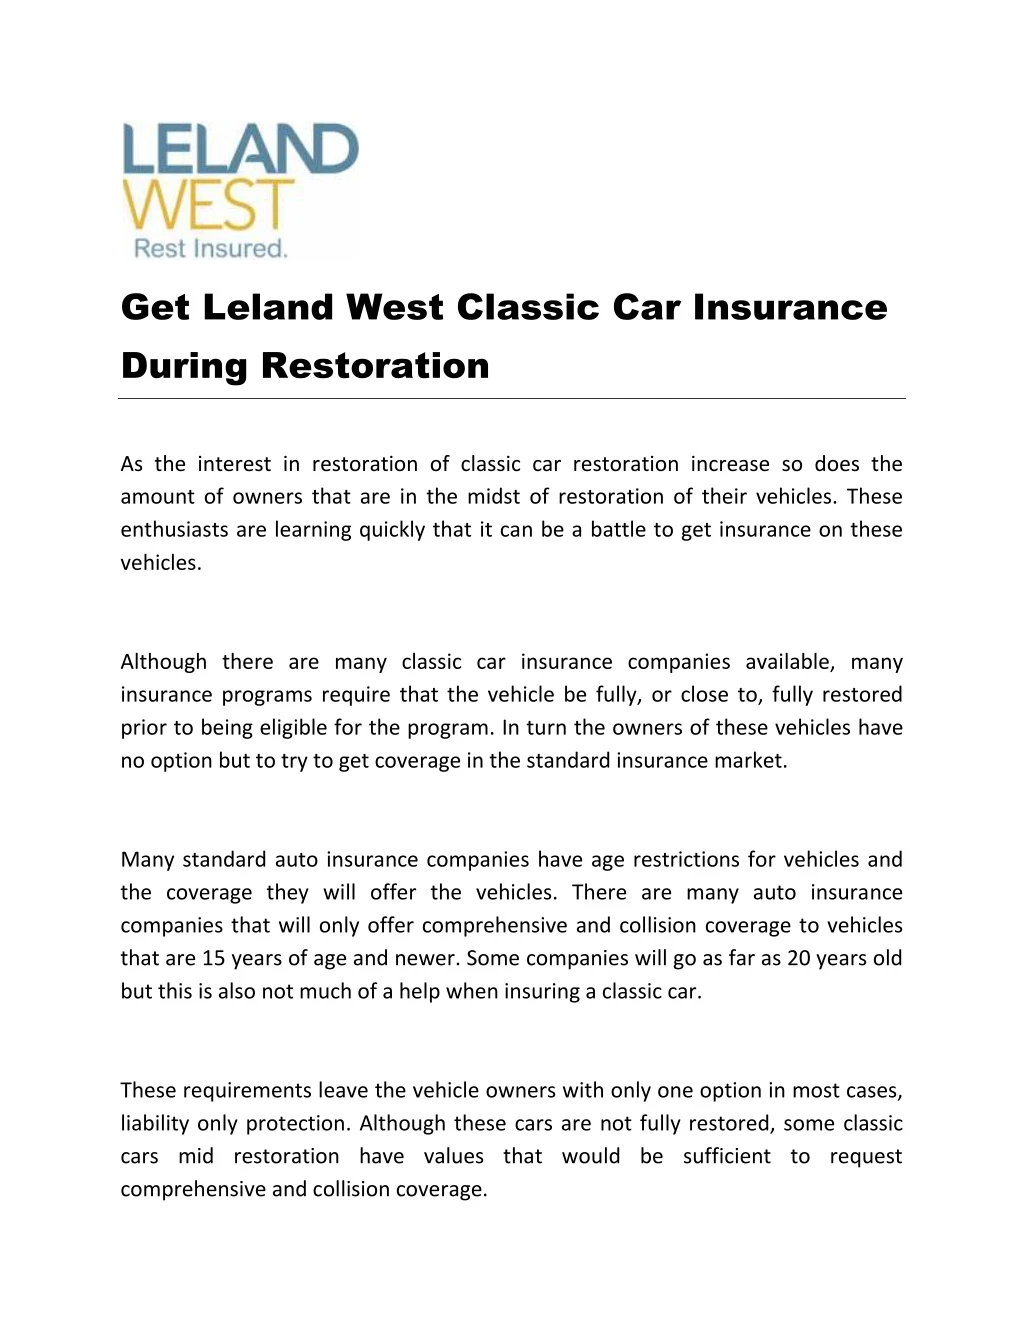 get leland west classic car insurance during